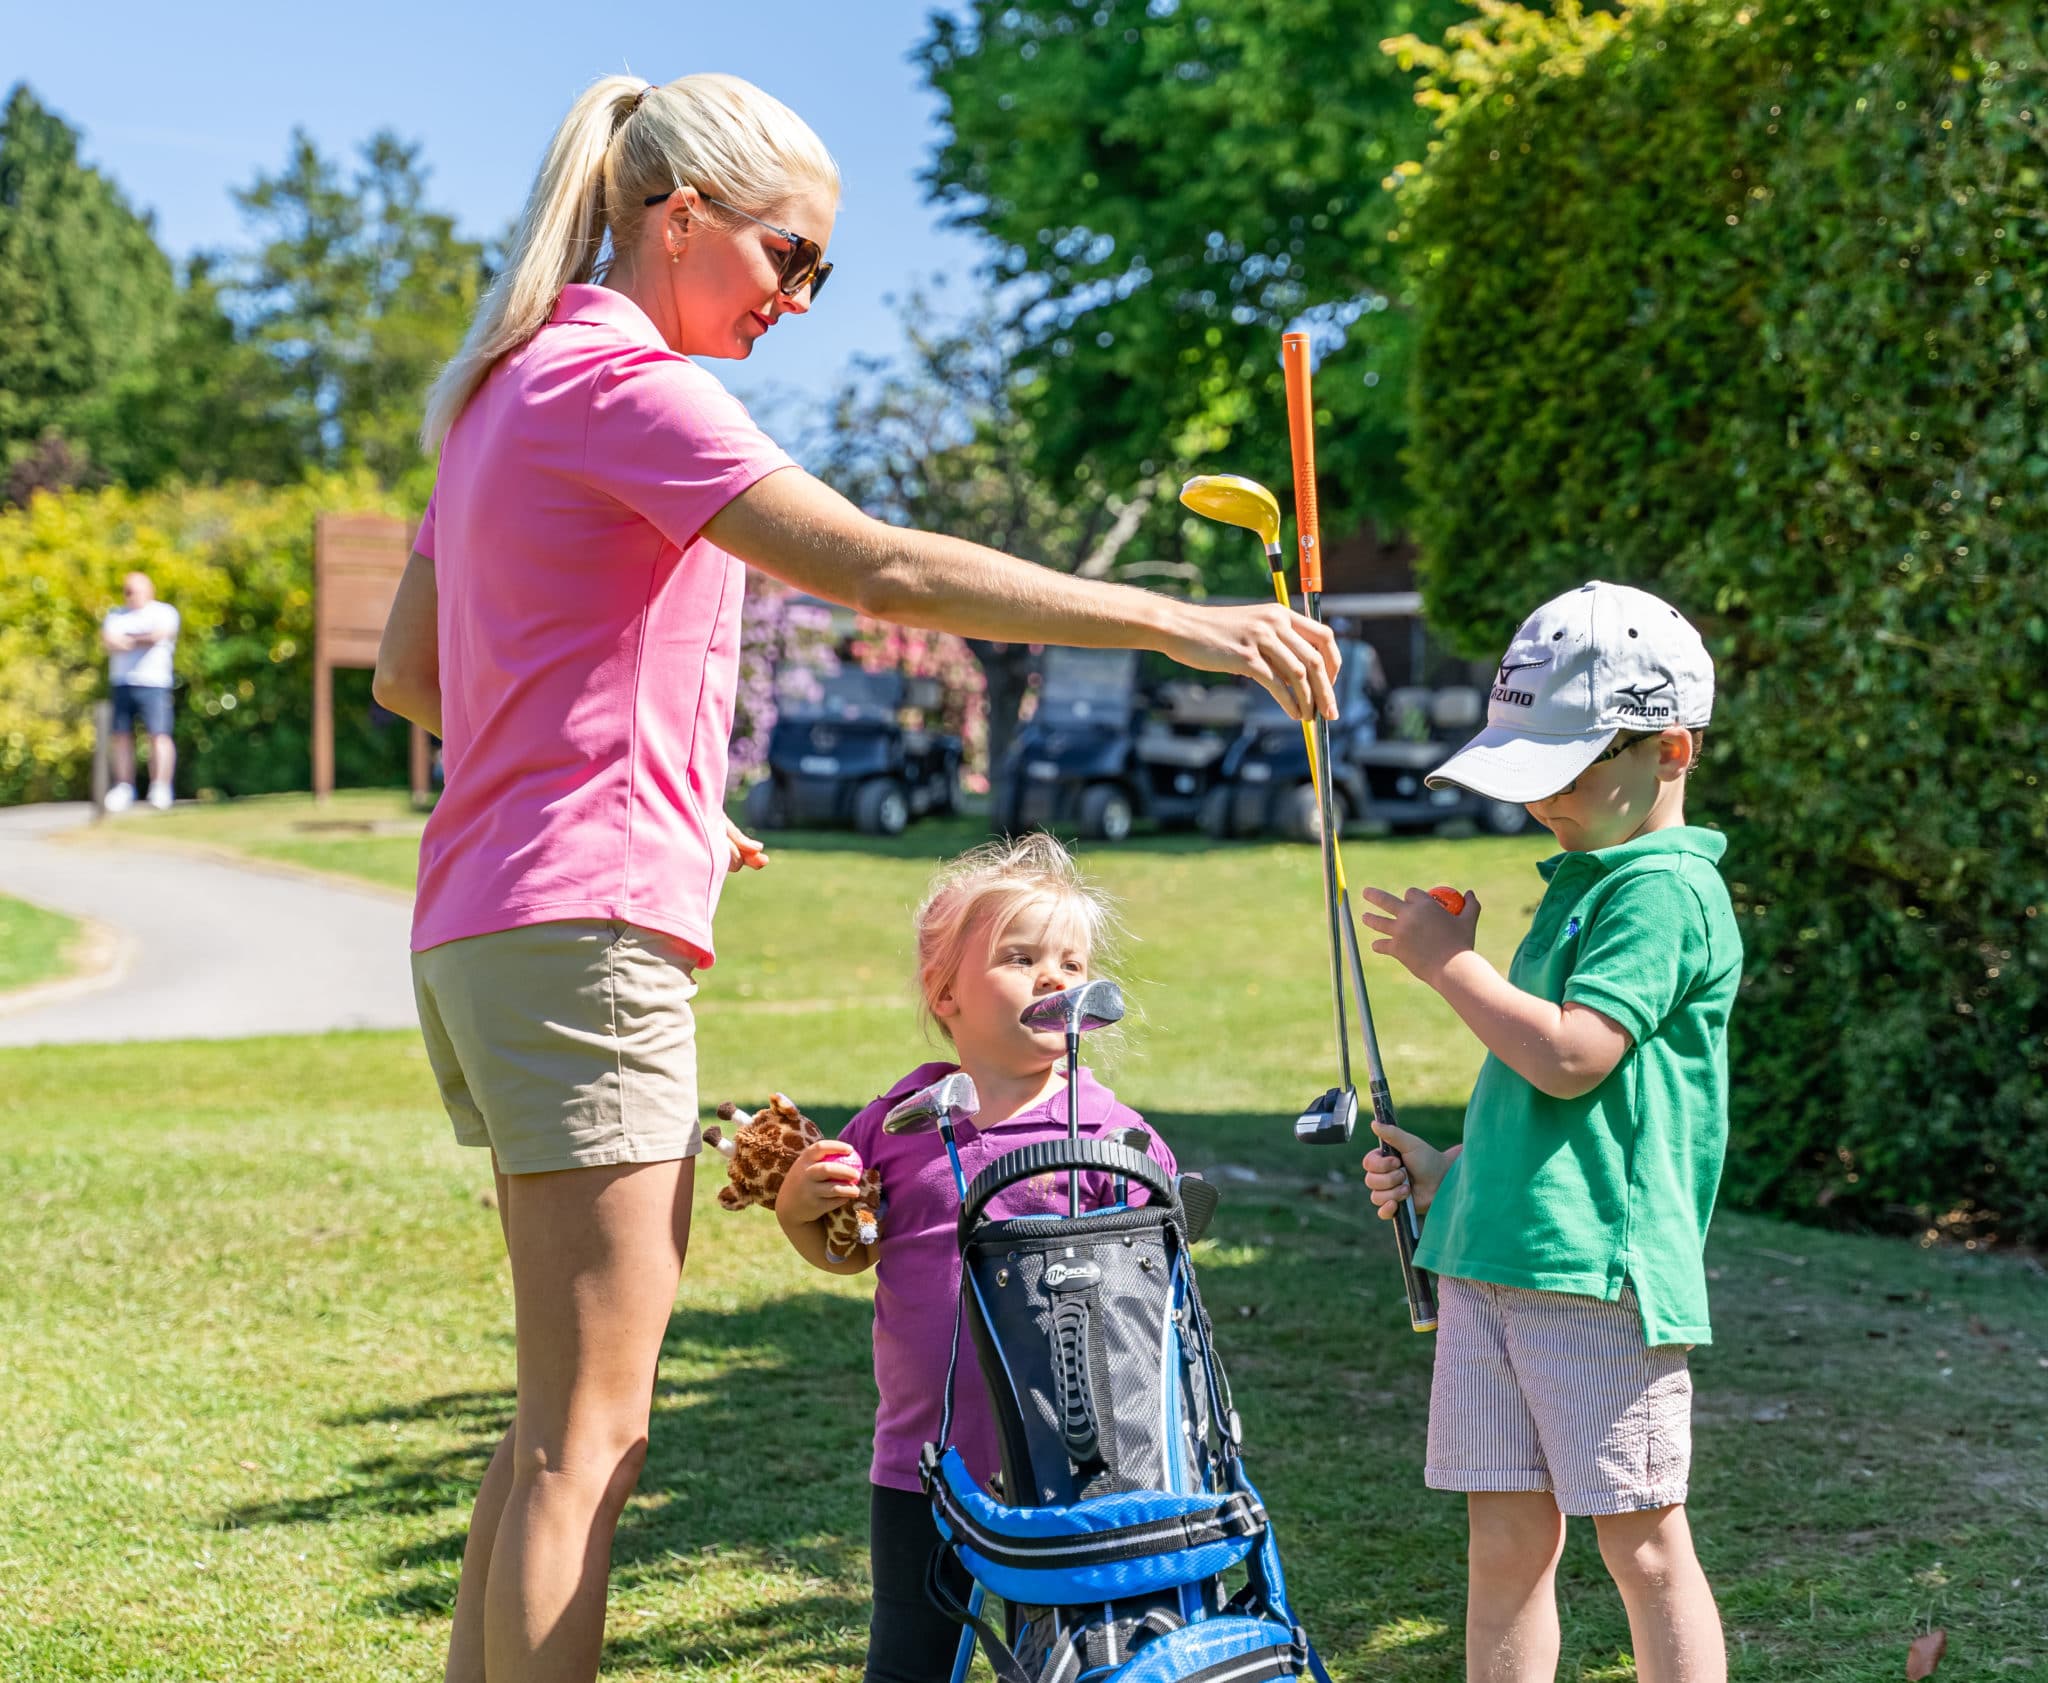 Two children are being shown how to play gold, a woman in a pink t-shirt is handing a club to a boy in a green t-shirt and cap, the second child is stood with the golf club bag.